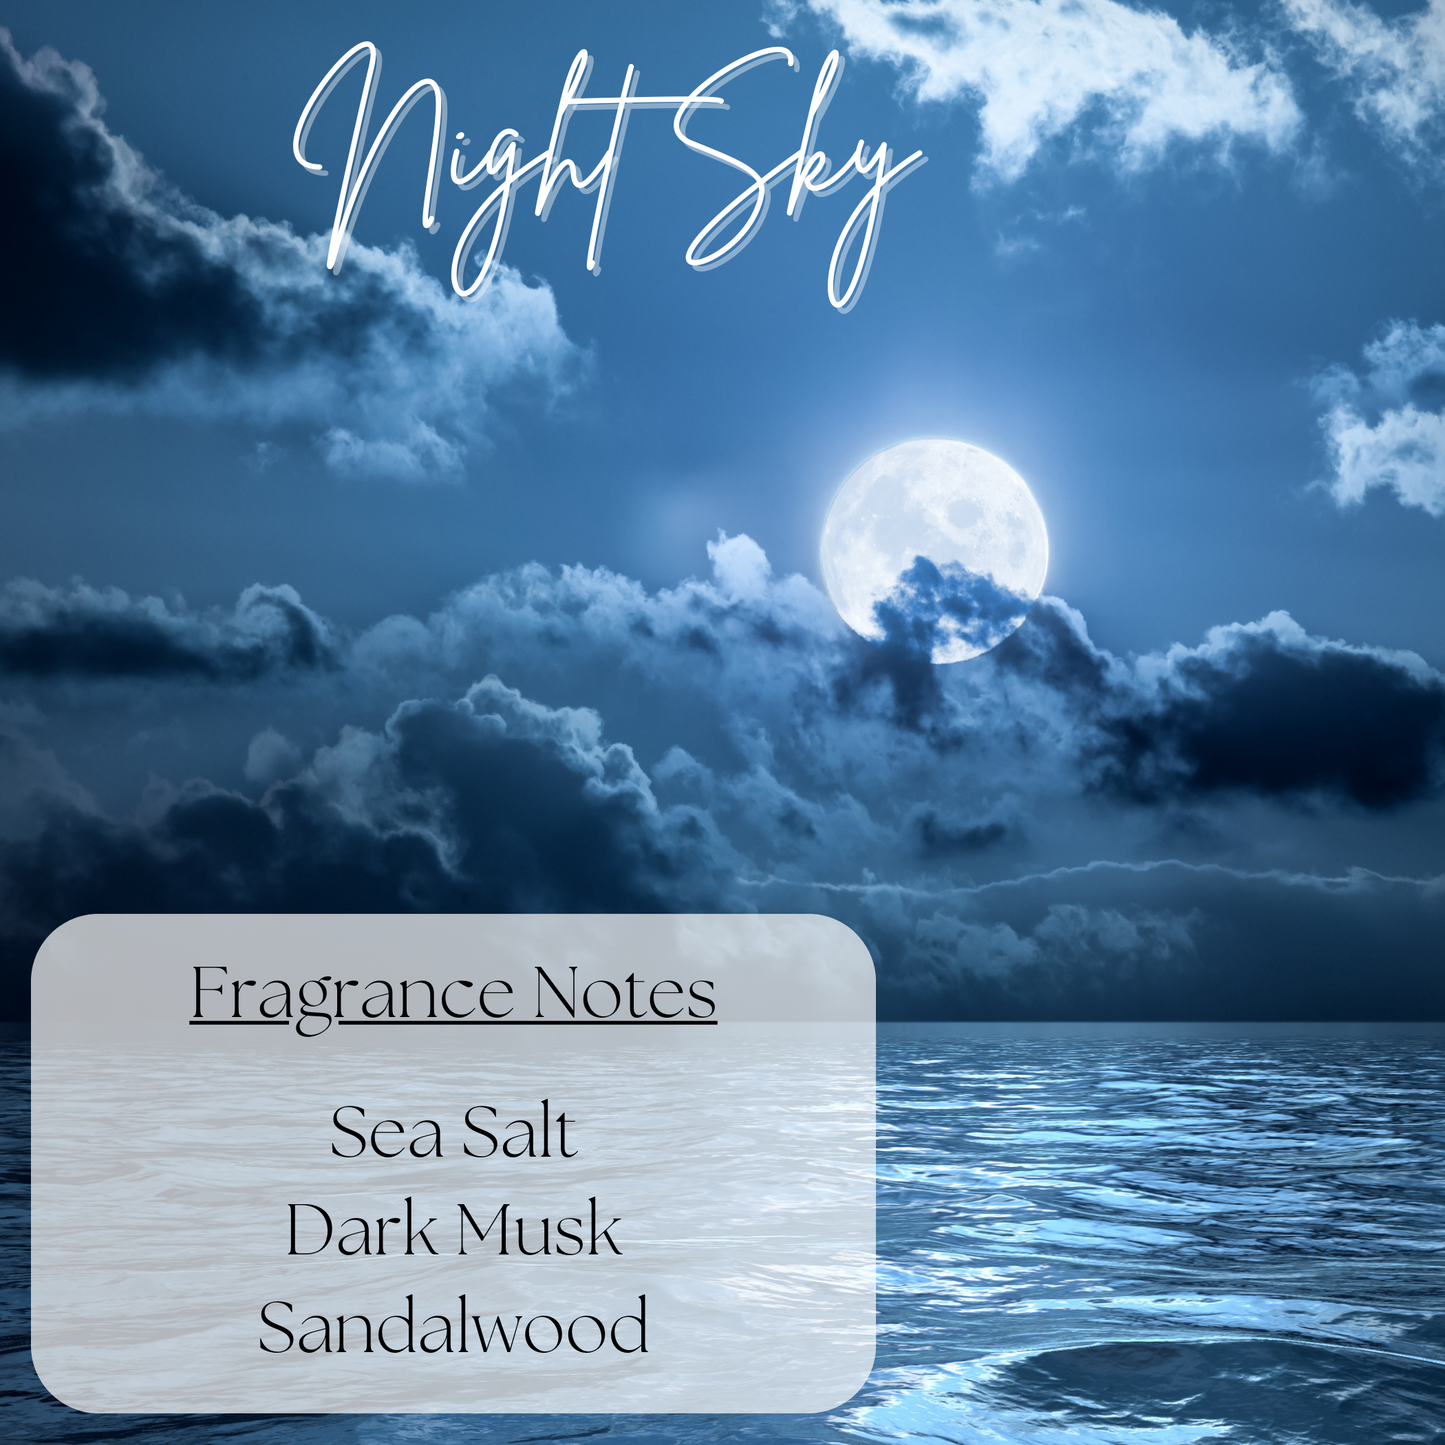 Night Sky - 11.5oz Scented Candle